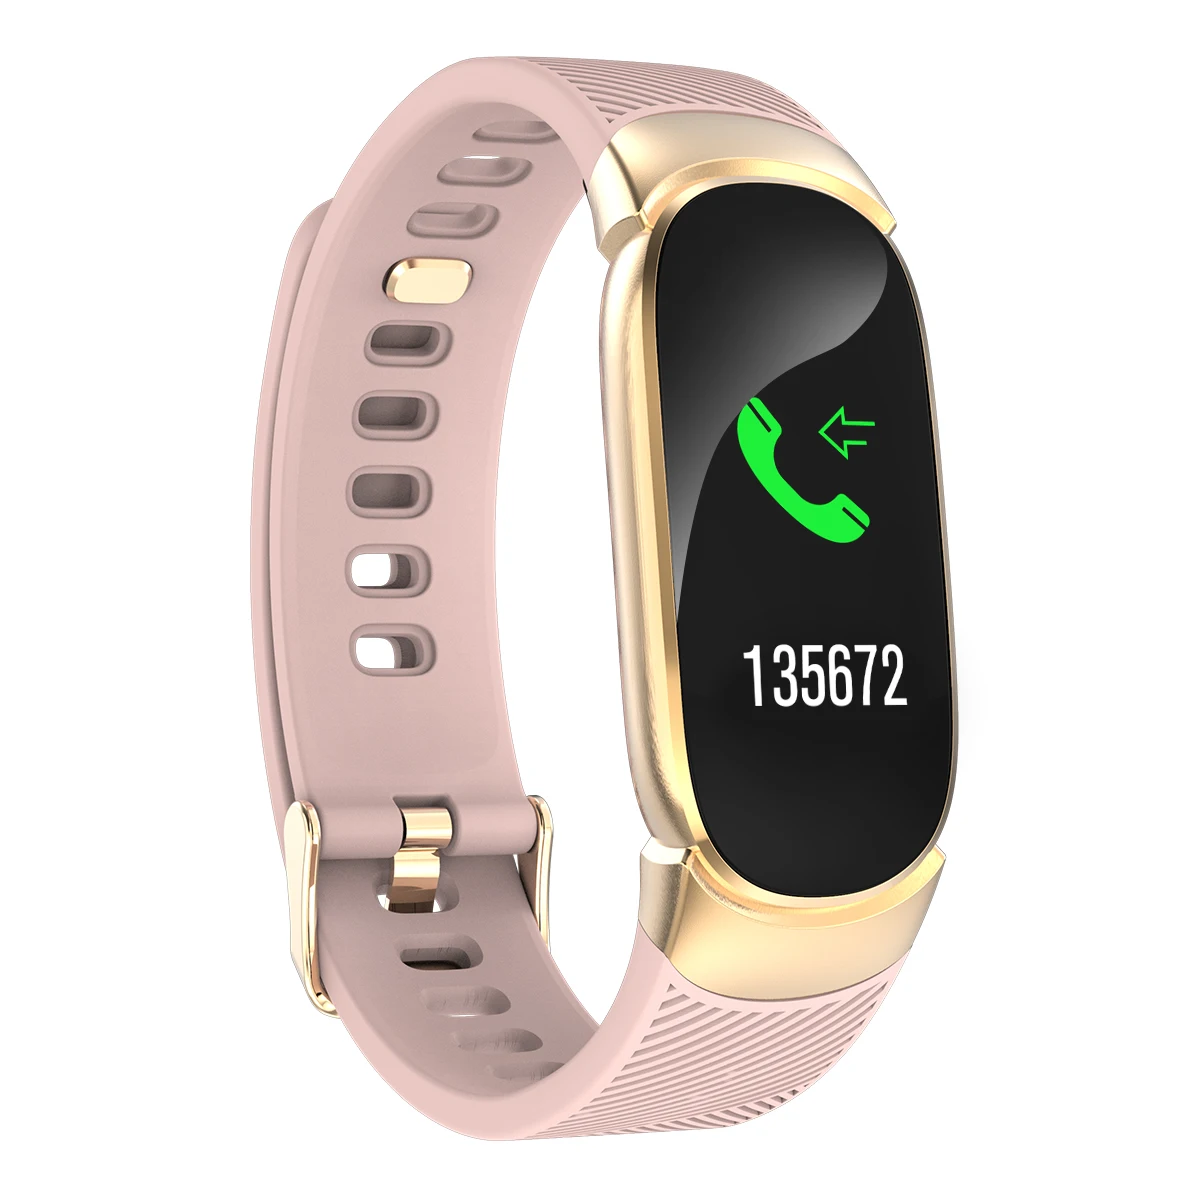 

qw16 smart watch Drinking water reminder heart rate multiple sports Monitoring 15 days long battery life, 4colors